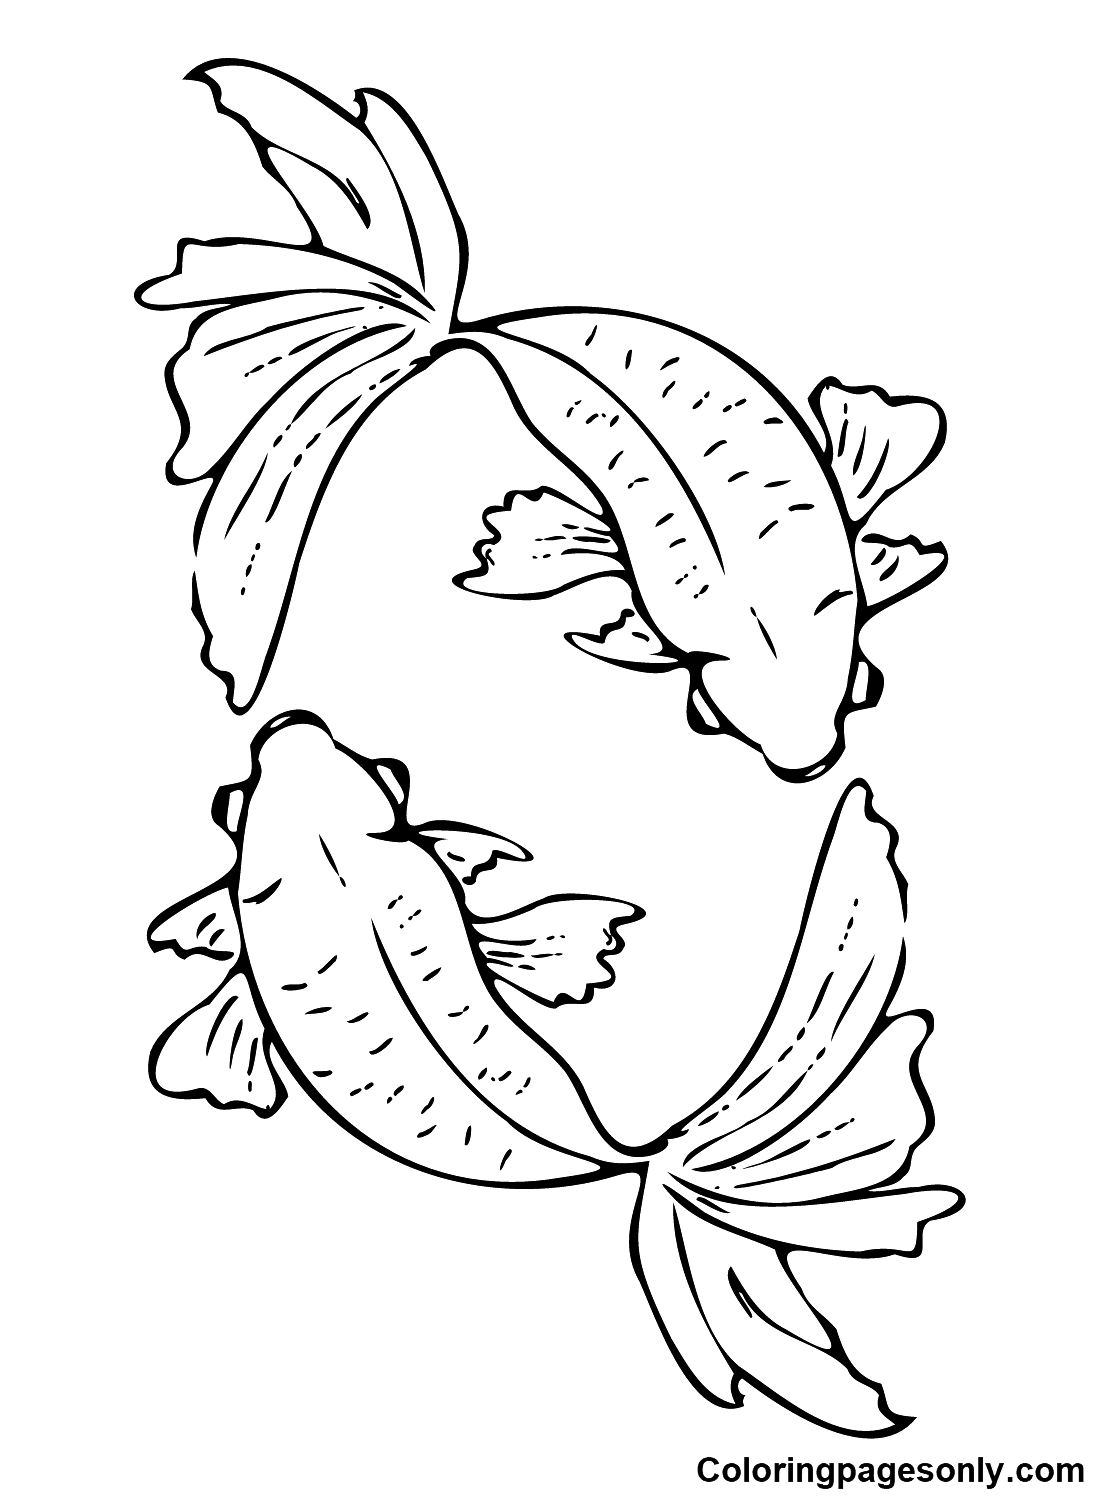 Pictures of Koi Fish Coloring Pages